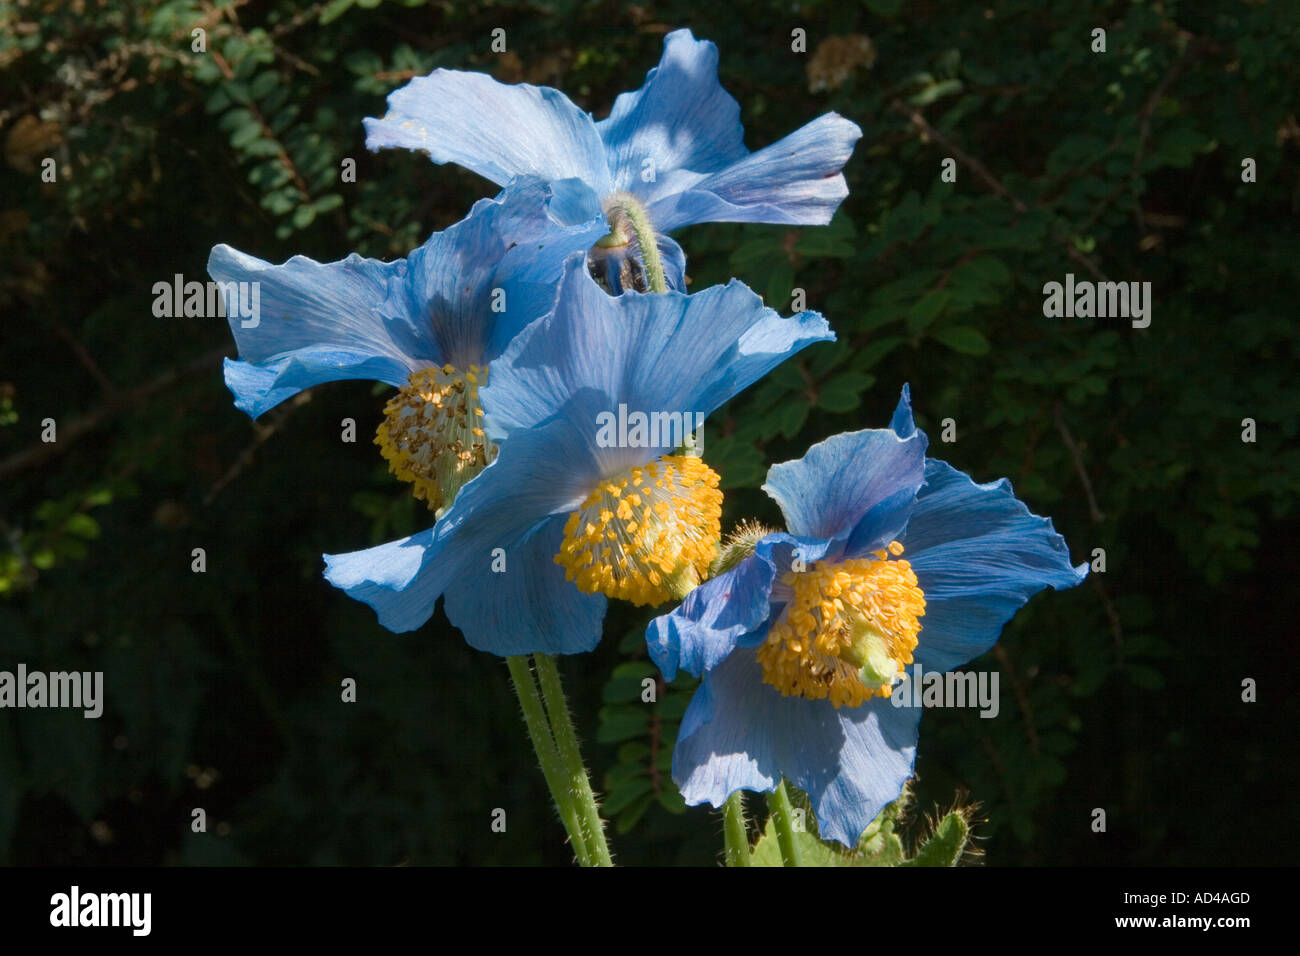 Blue Meconopsis betonicifolia, also known as Meconopsis baileyi and the Himalayan blue poppy, growing in Aberdeenshire, Scotland, UK Stock Photo